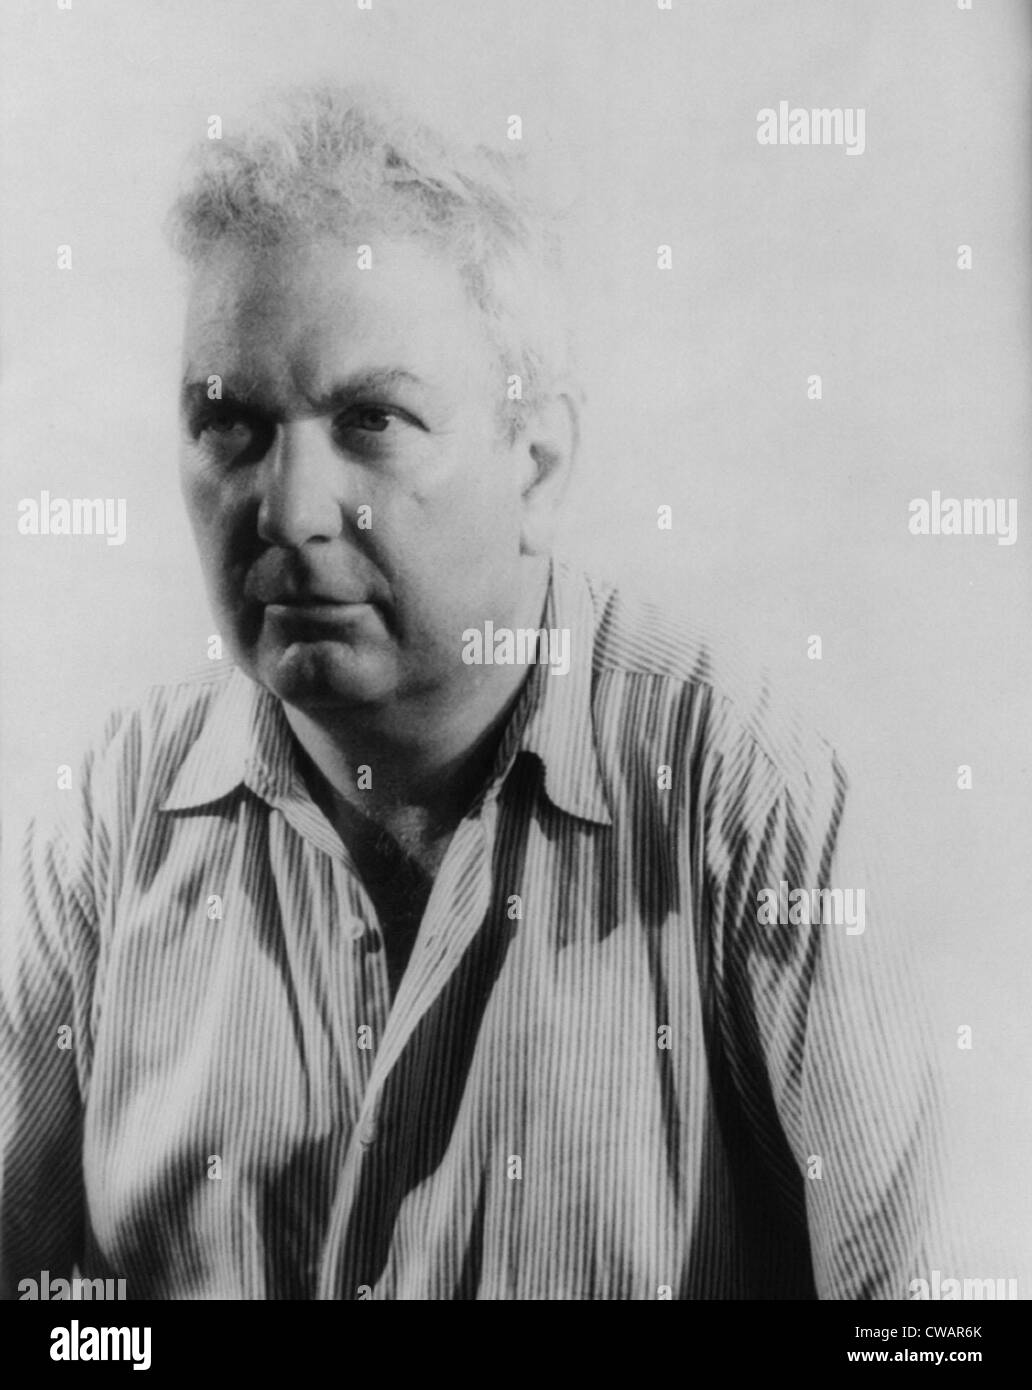 Alexander Calder (1898-1976), was educated as an engineer, before he studied art in New York in the 1920s. After 1926, in Stock Photo